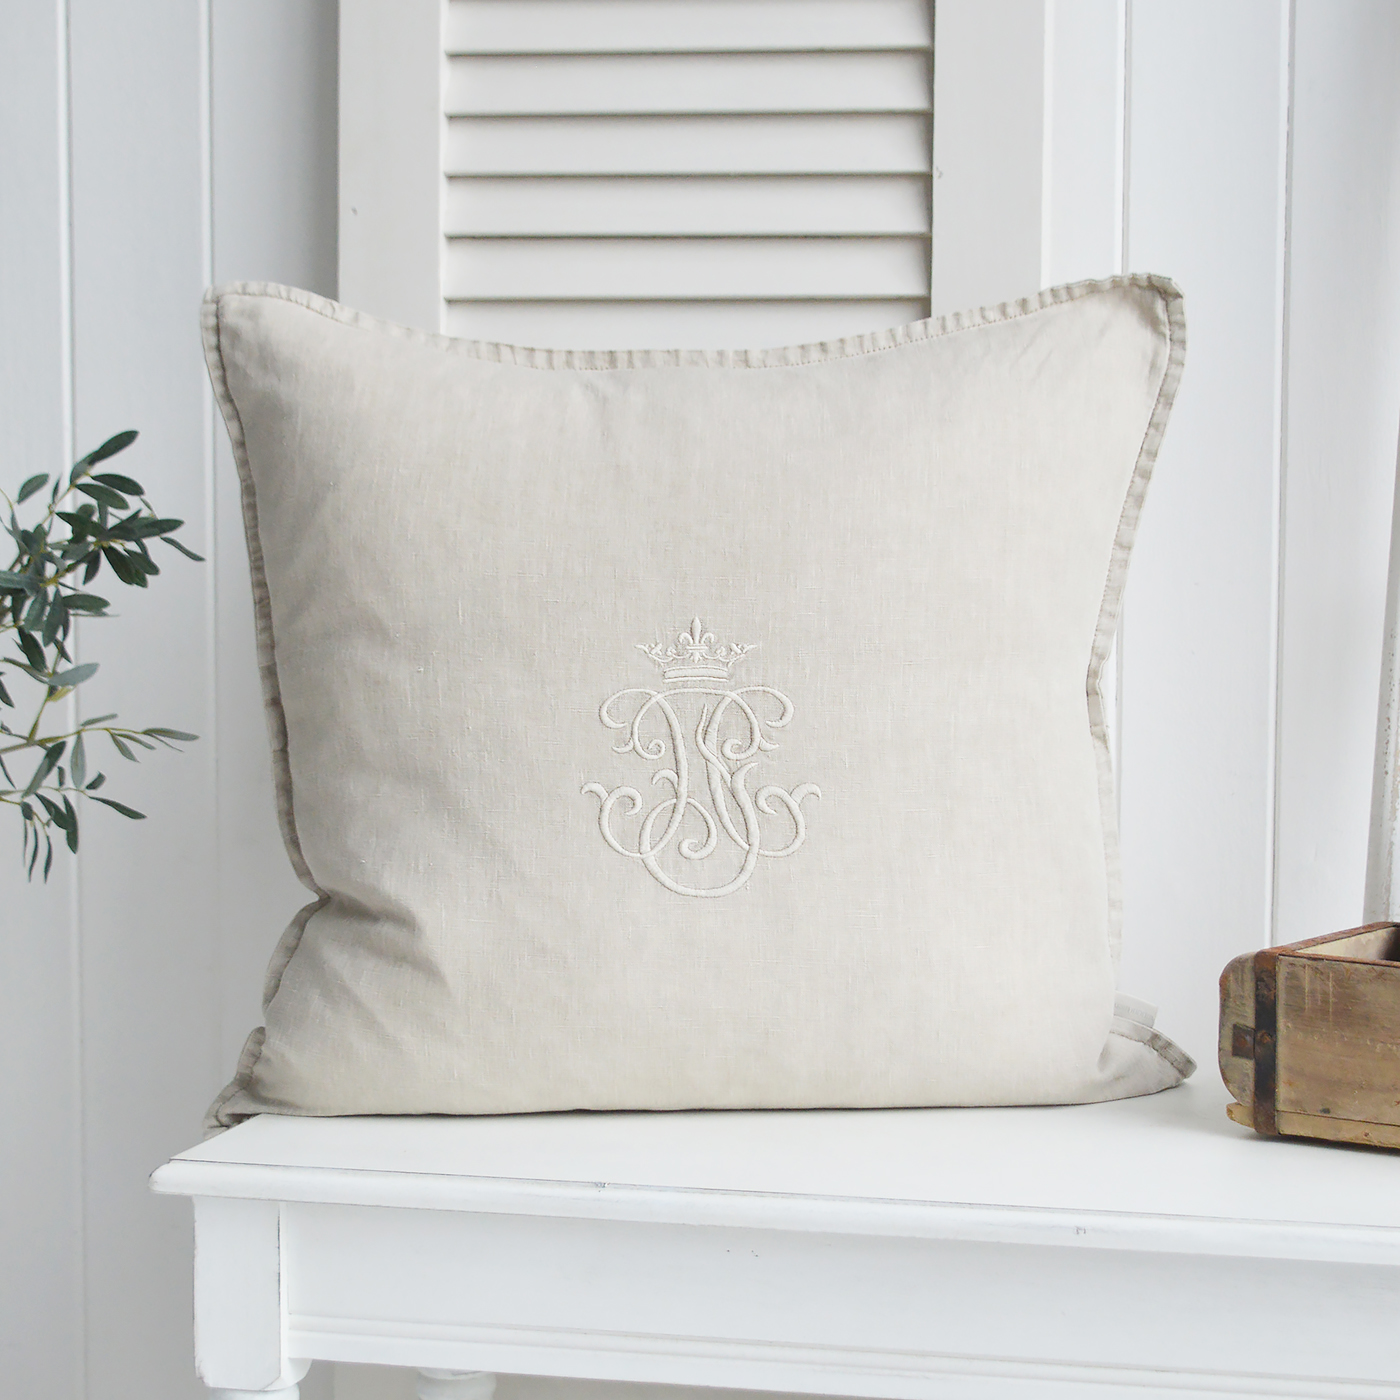 New England Style cushions for modern country, farmhouse and Coastal .  White and coastal furniture for homes and interiors. Richmond 100% stonewashed natural Linen Feather Filled Cushion